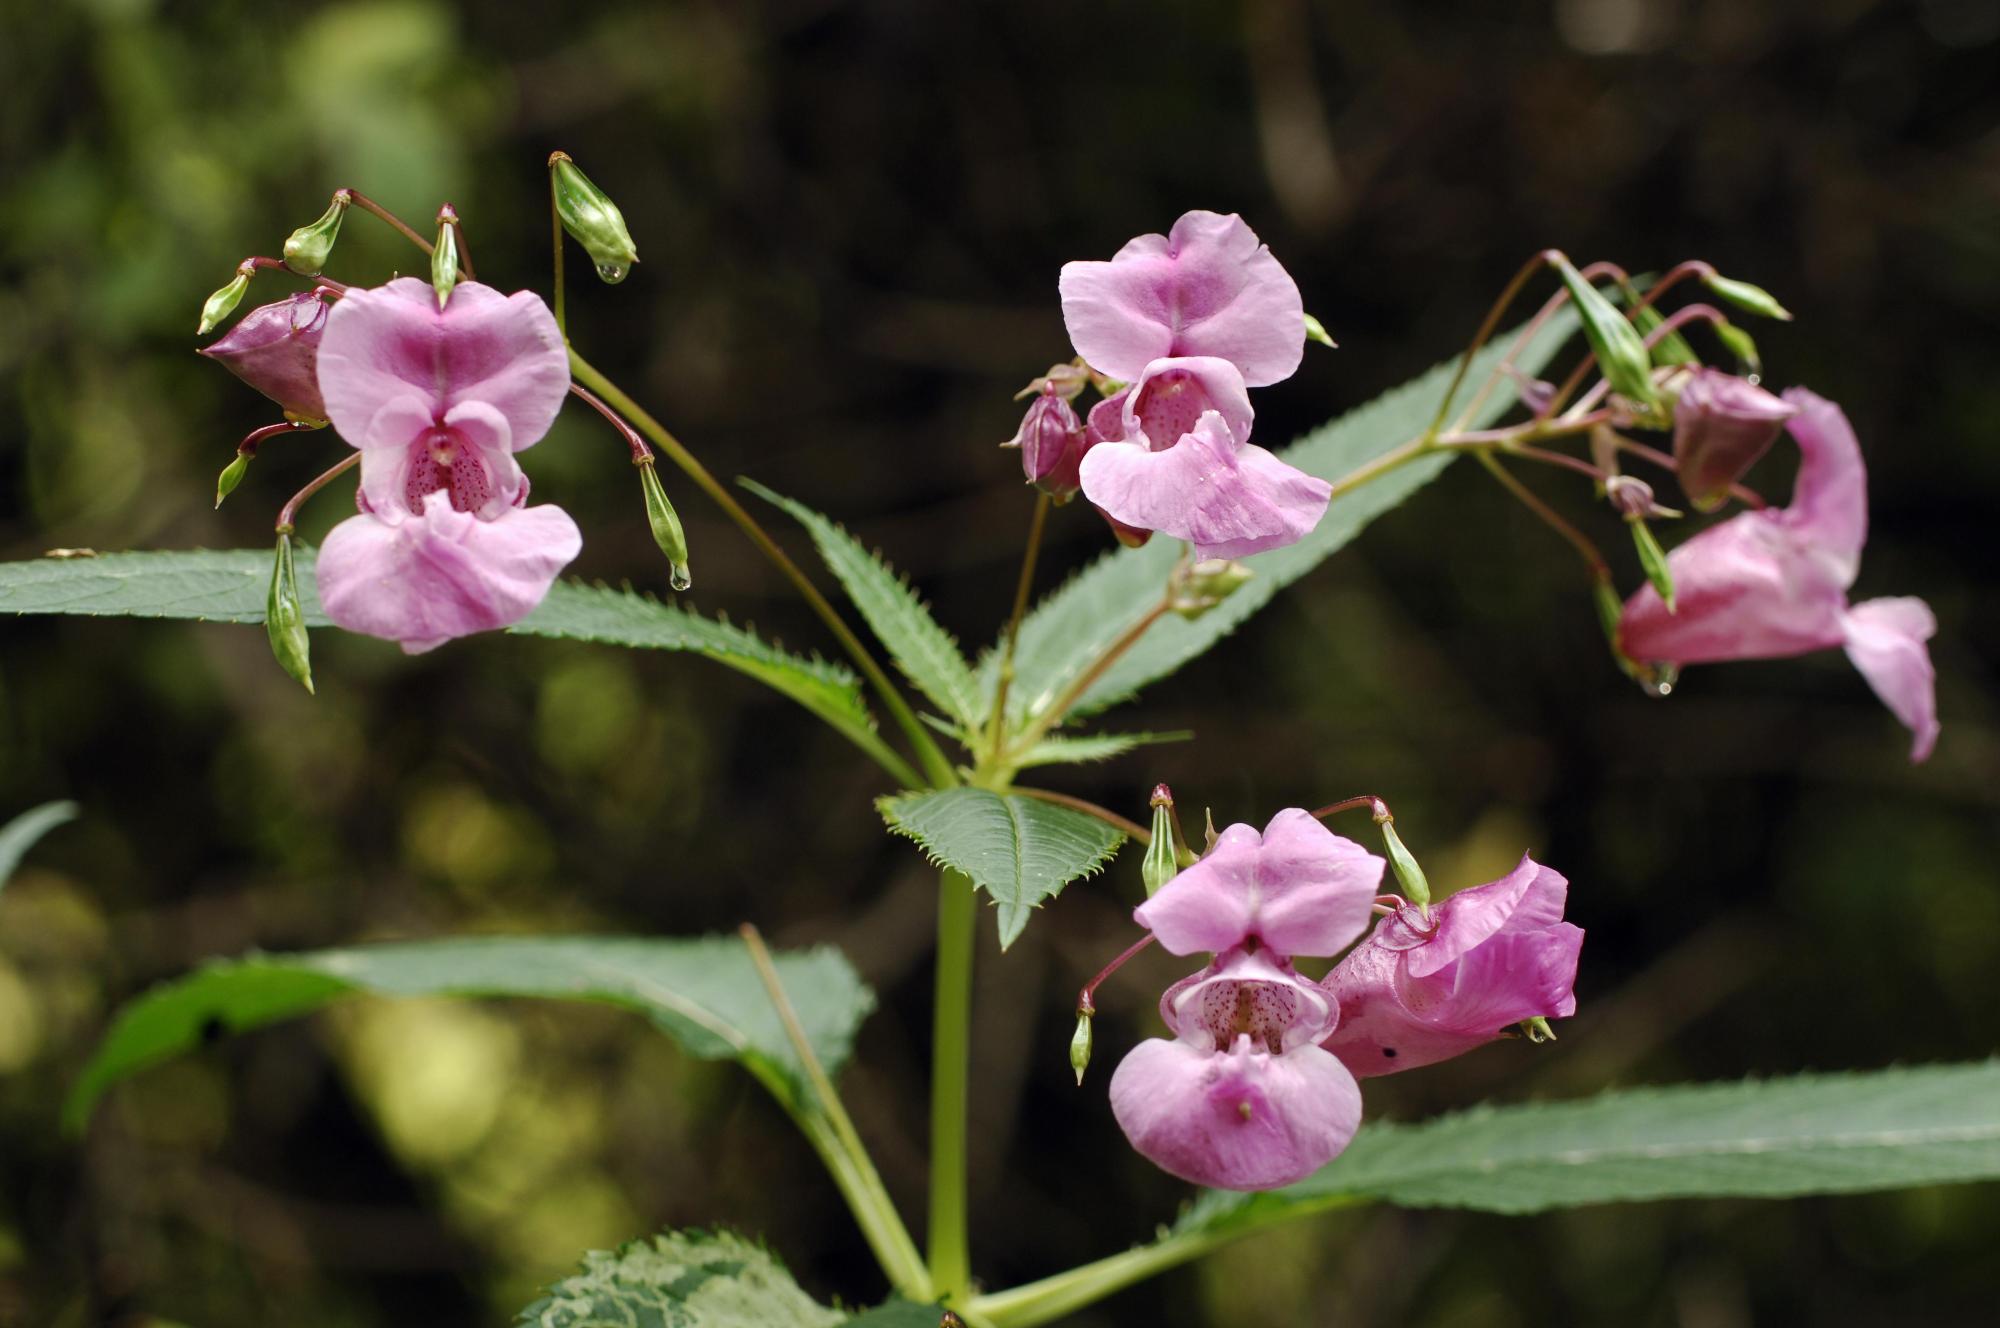 Himalayan Balsam (Impatiens glandulifera) an invasive non native plant. ©Lorne Gill/SNH. For information on reproduction rights contact the Scottish Natural Heritage Image Library on Tel. 01738 444177 or www.nature.scot